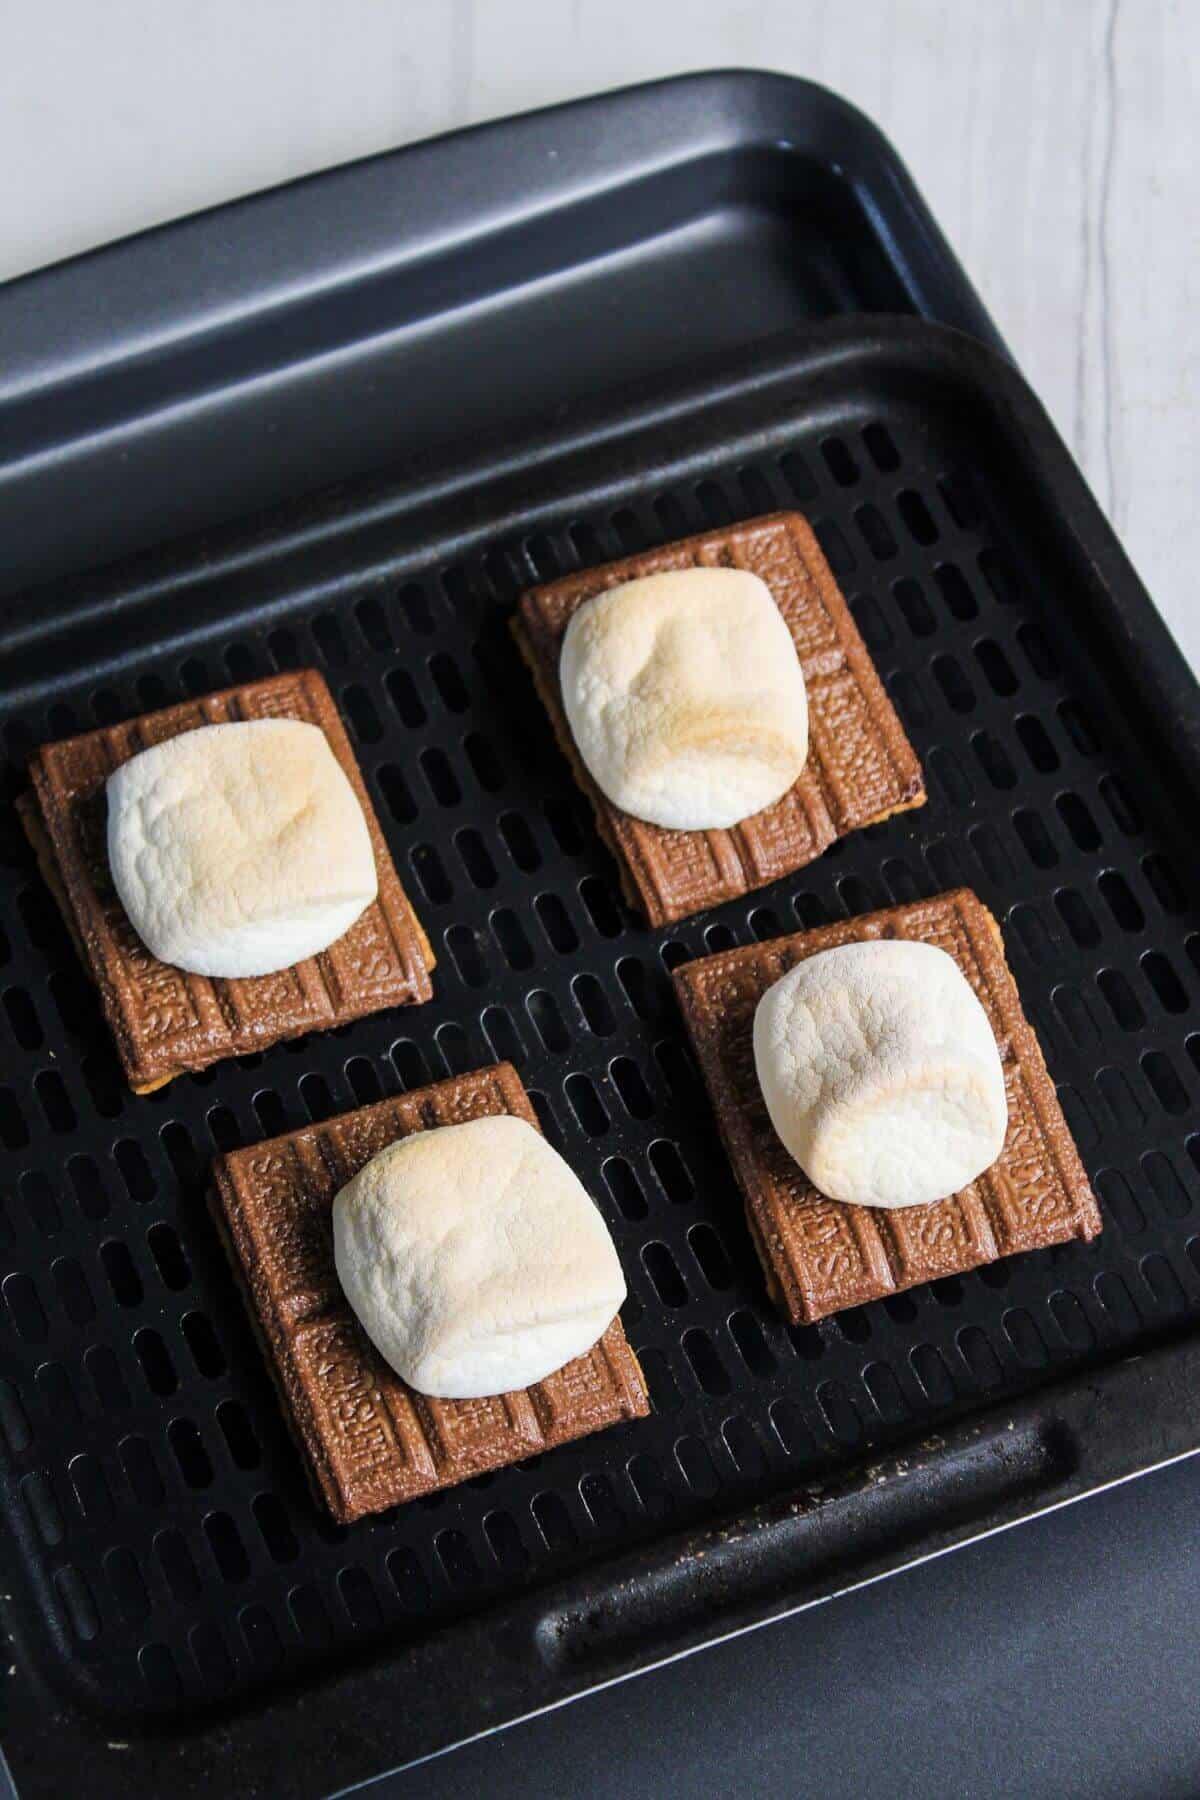 Four s'mores are sitting on an air fryer tray